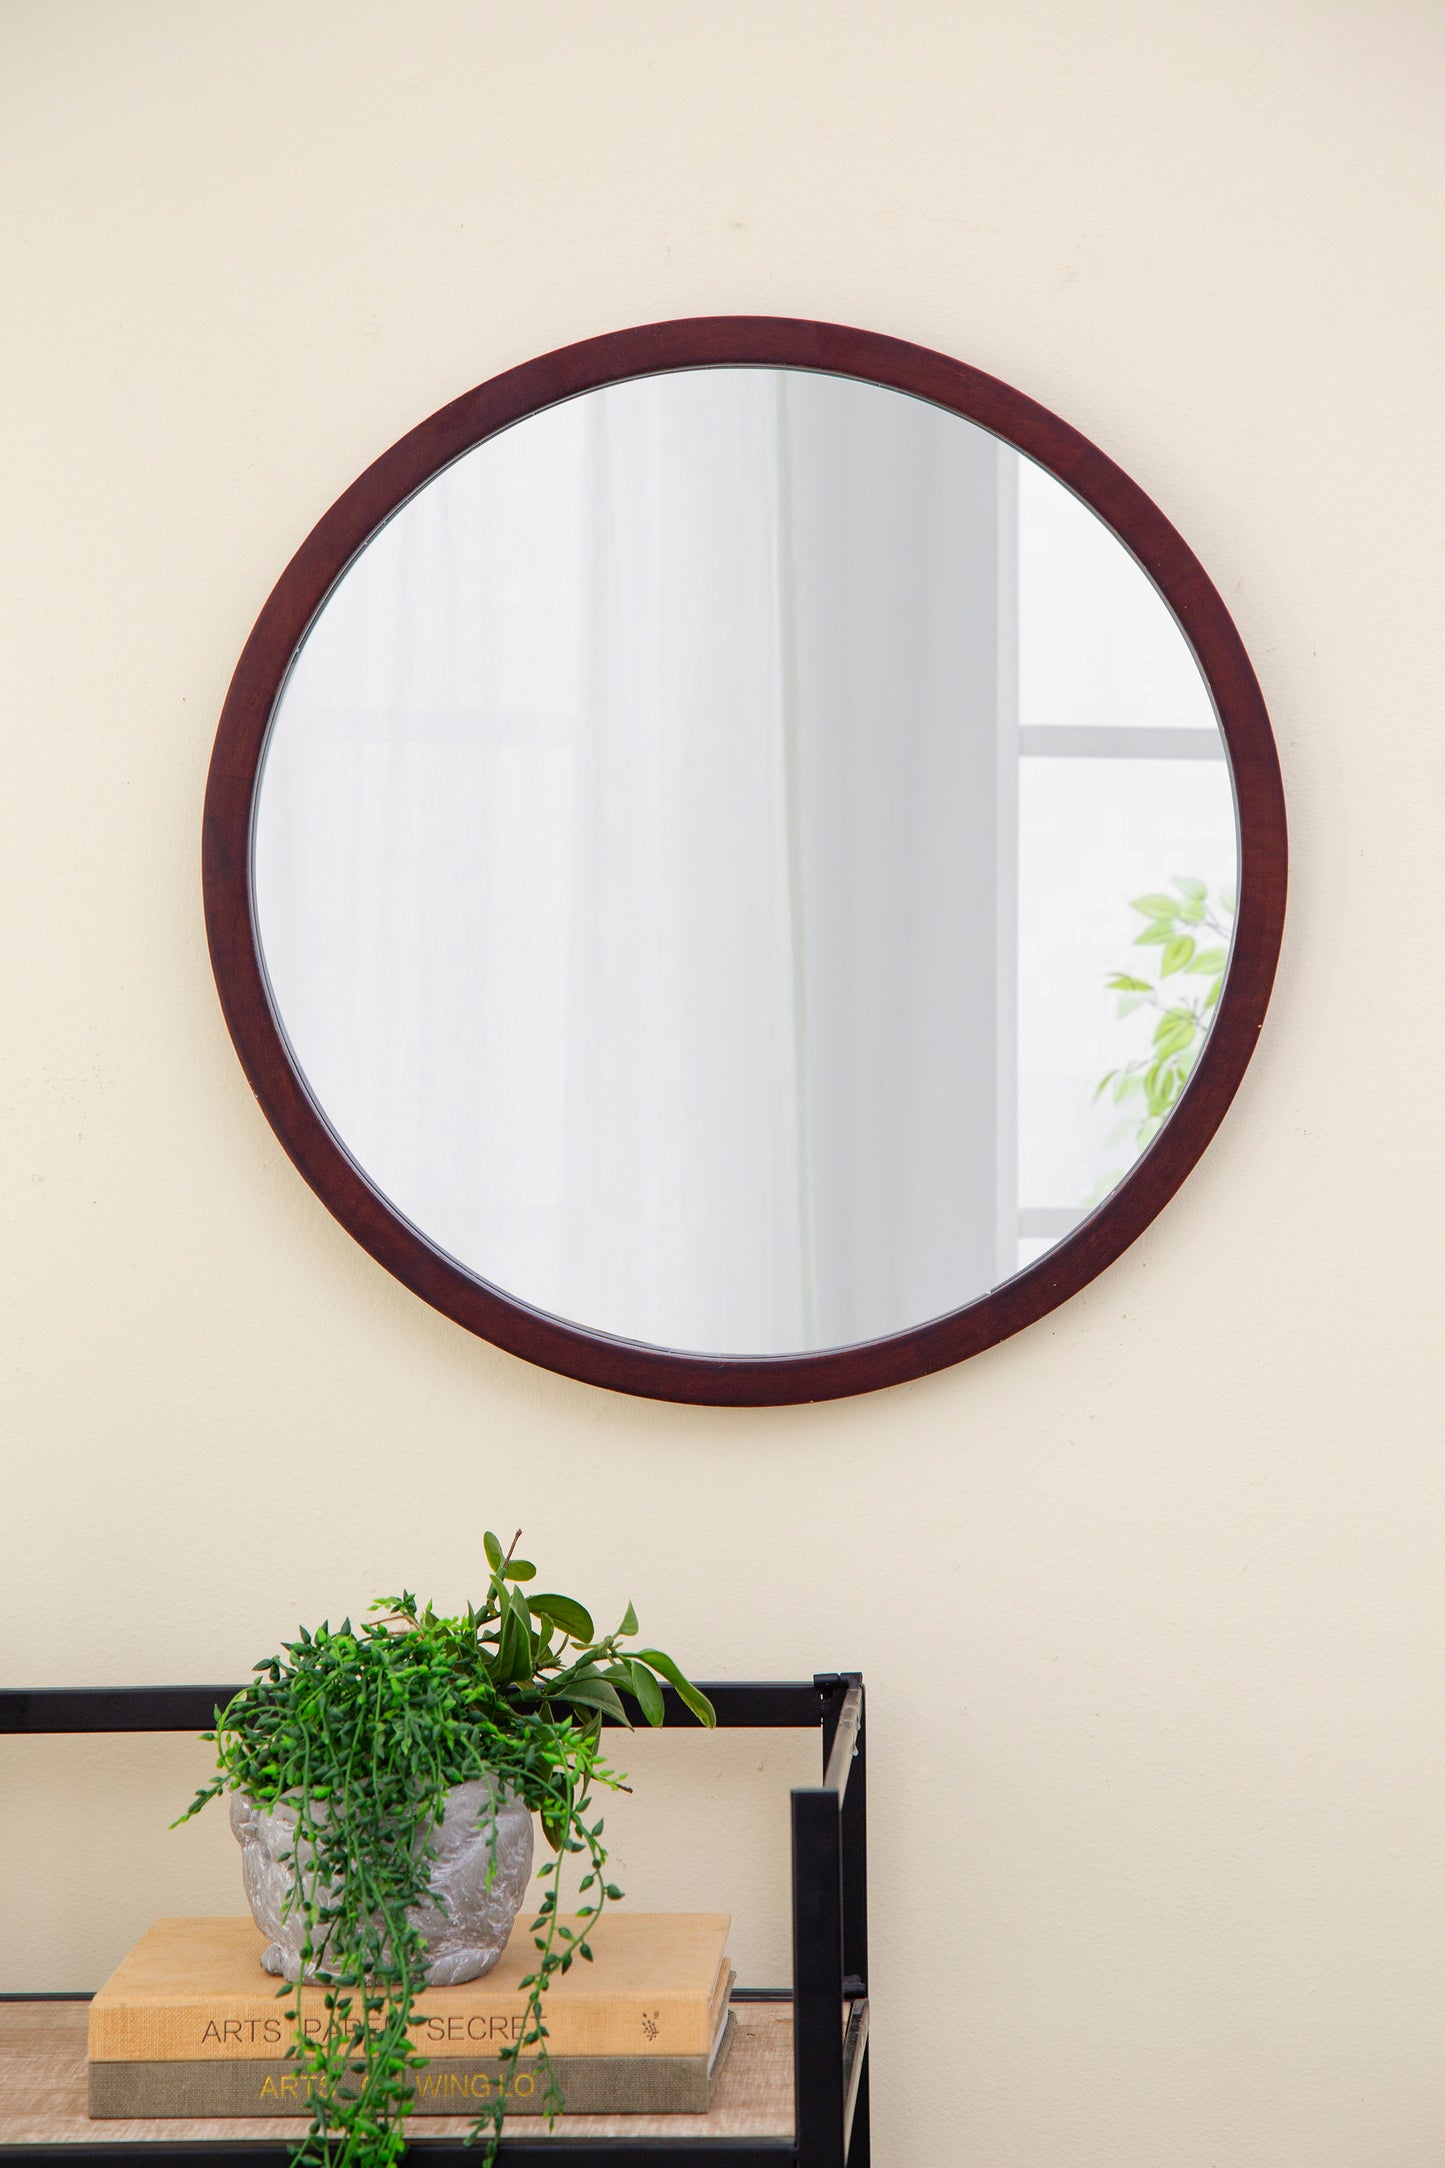 20" x 20" Circle Wall Mirror with Walnut Wooden Frame